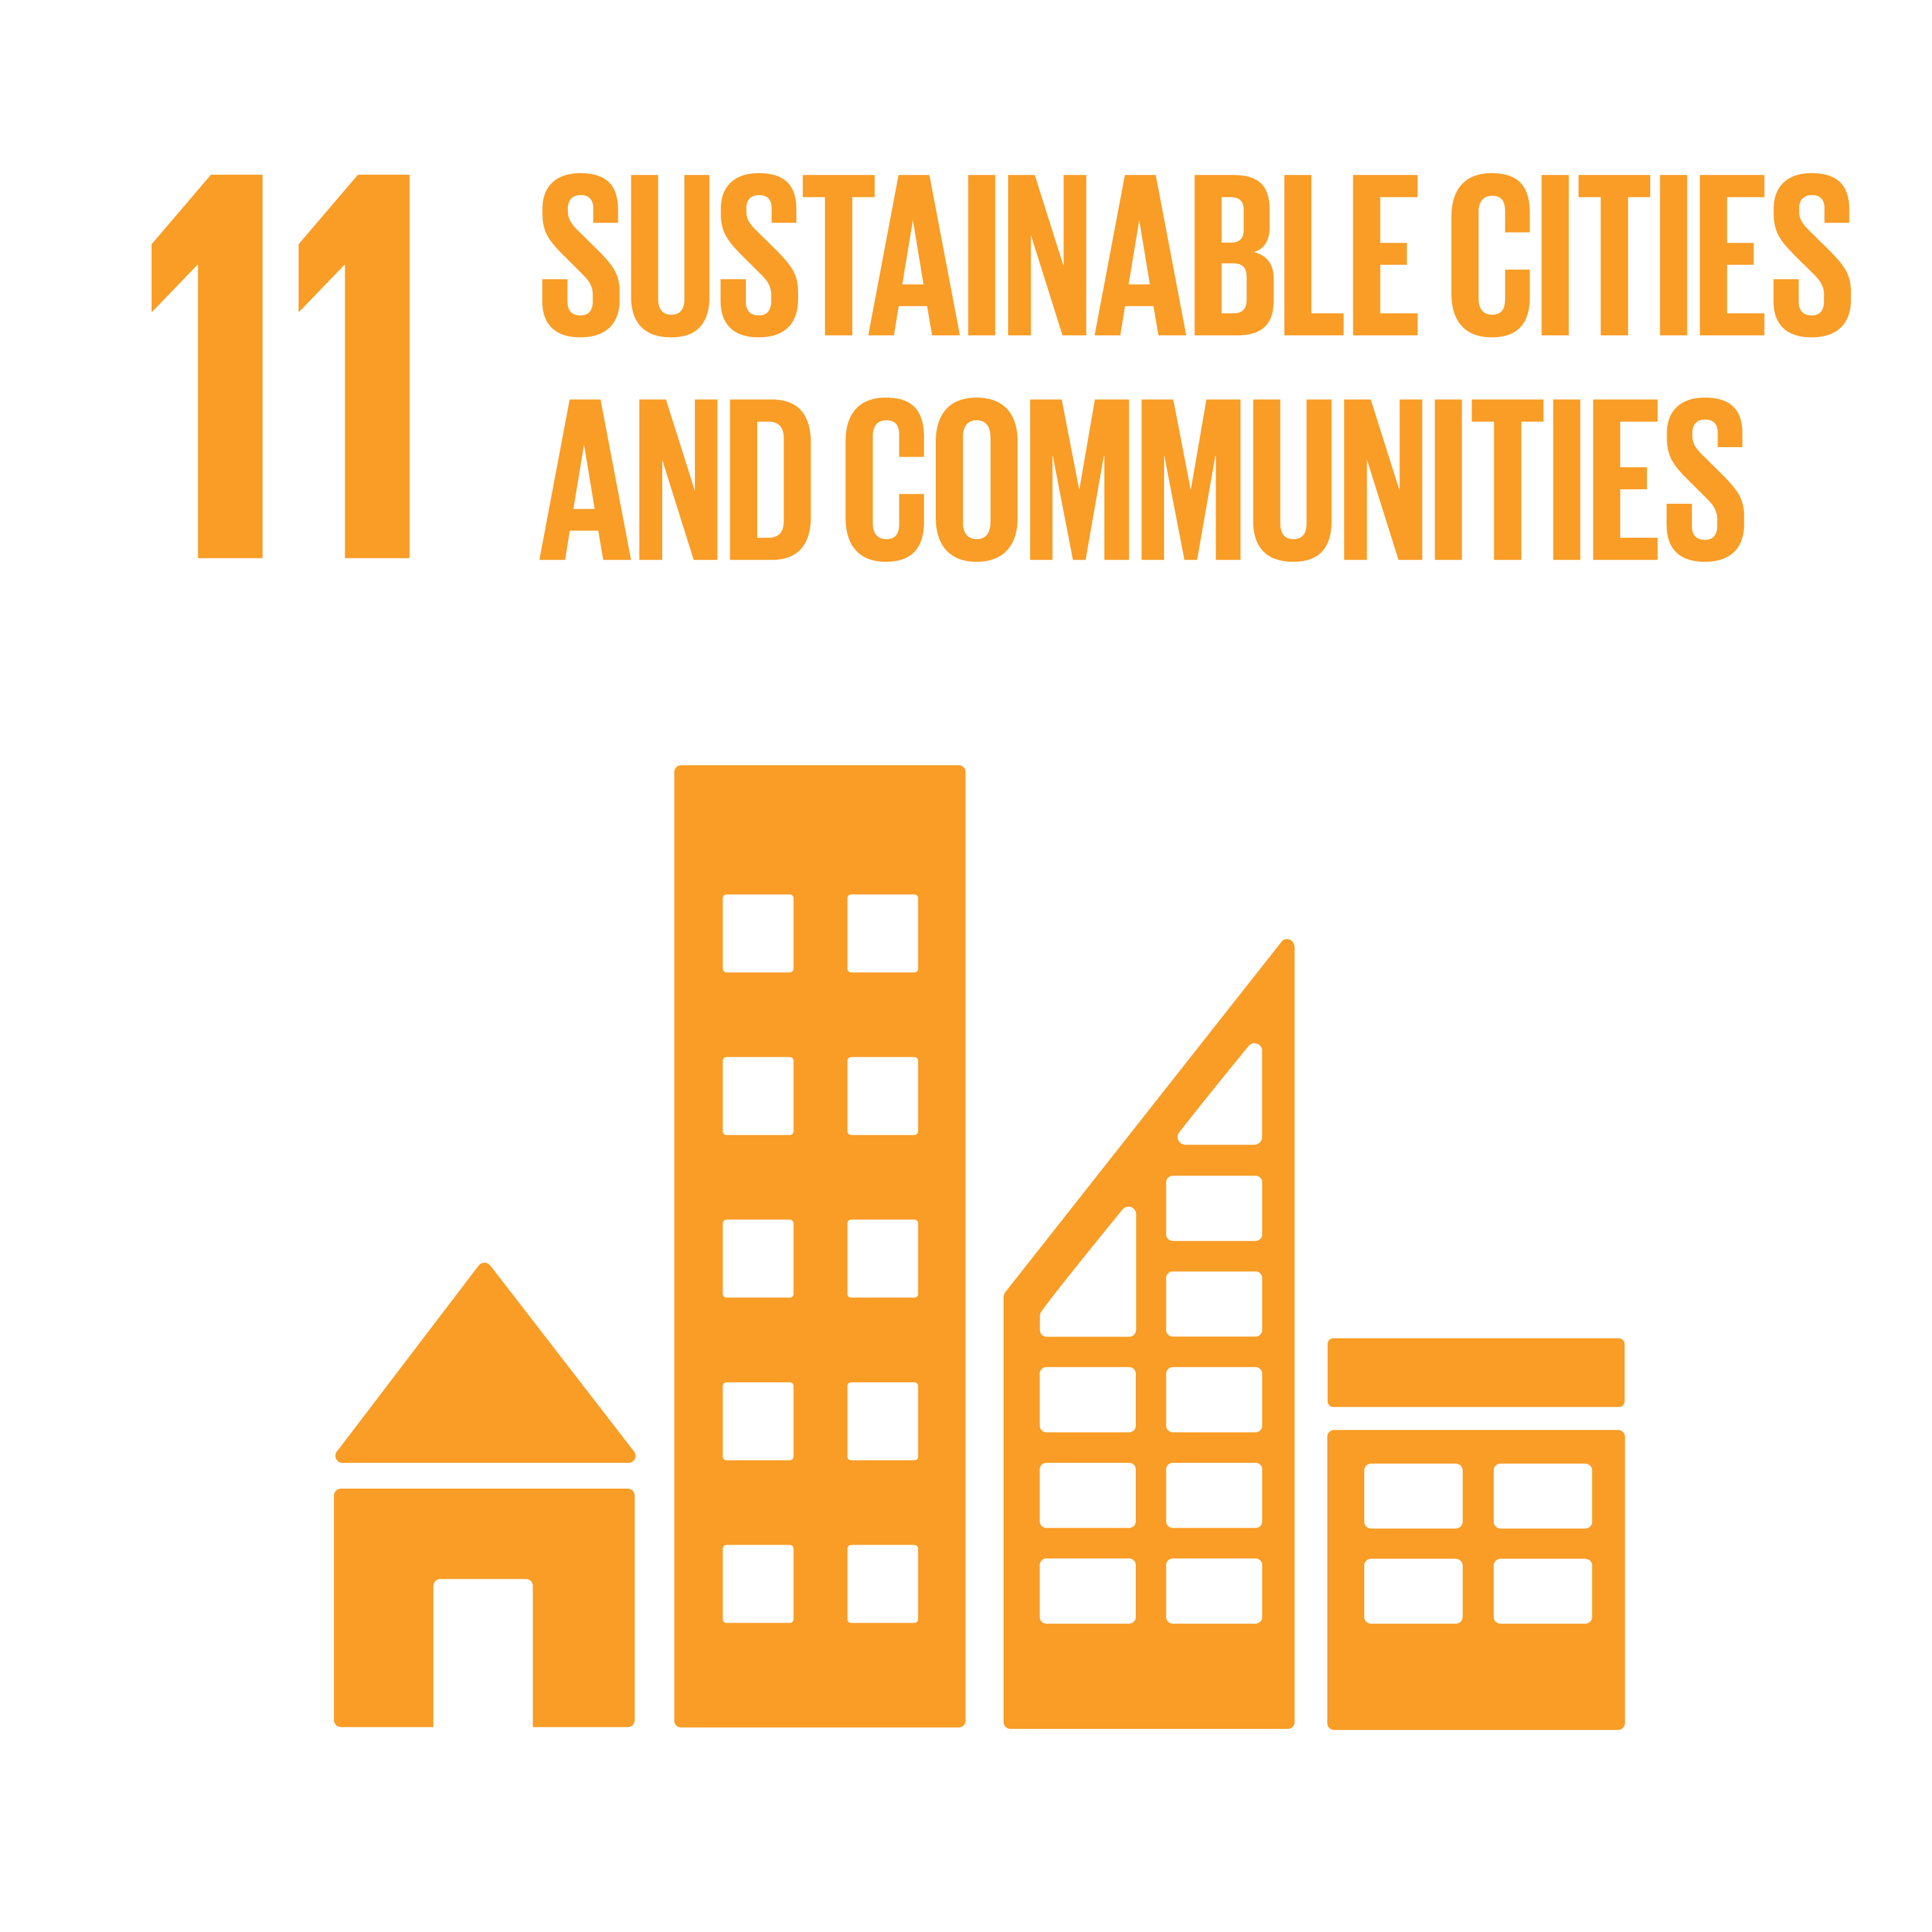 SDG11: Sustainable Cities and Communities